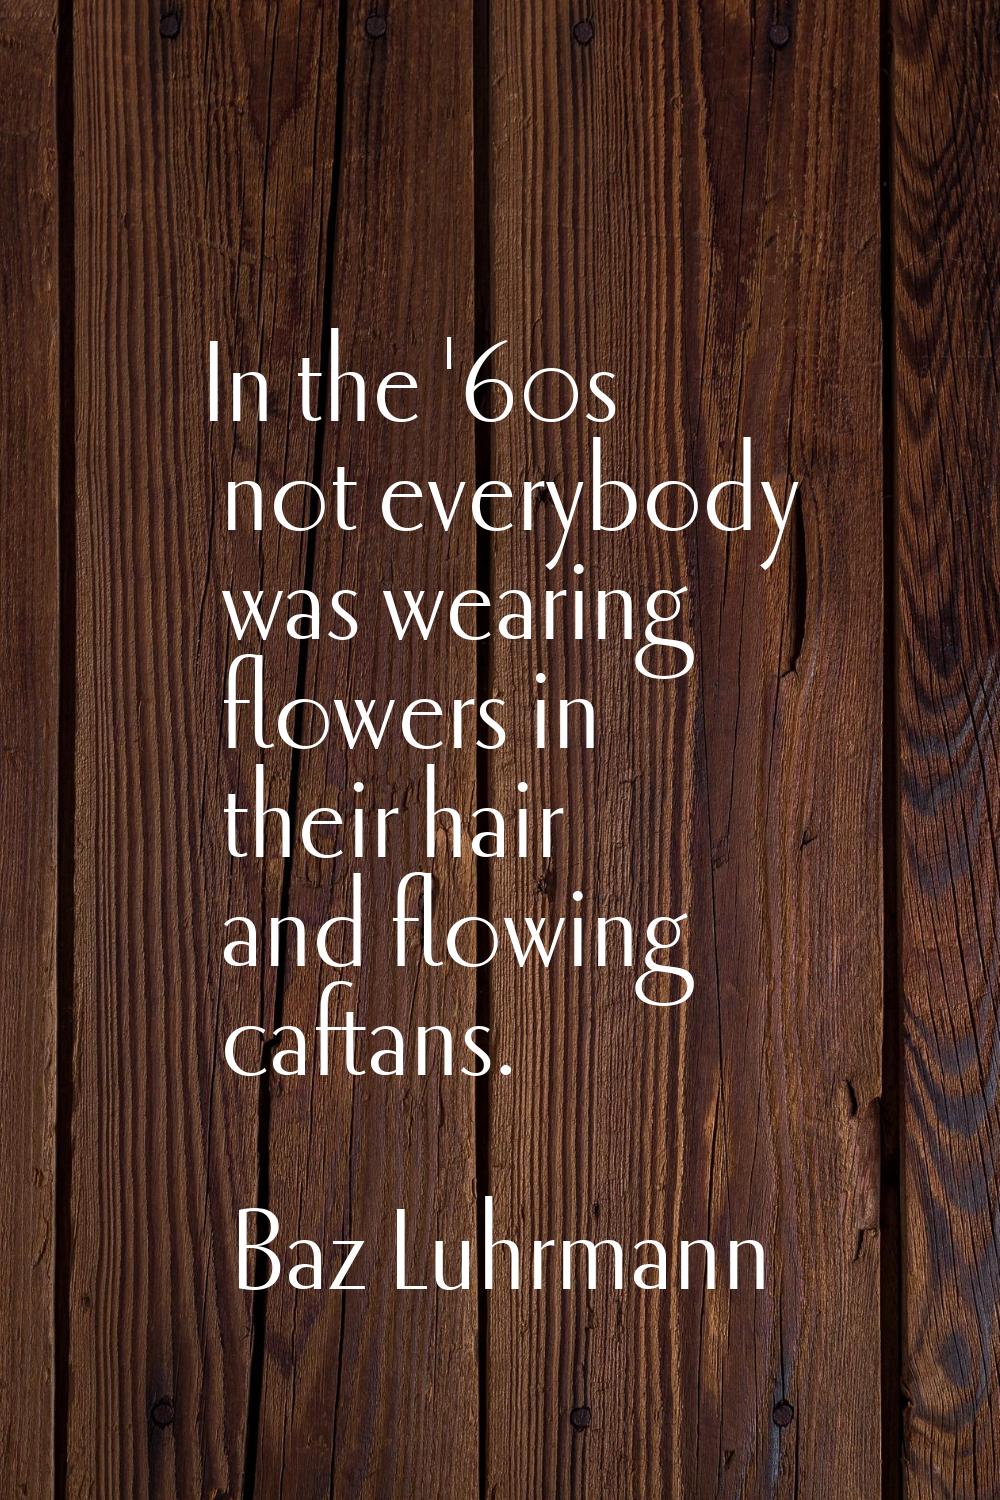 In the '60s not everybody was wearing flowers in their hair and flowing caftans.